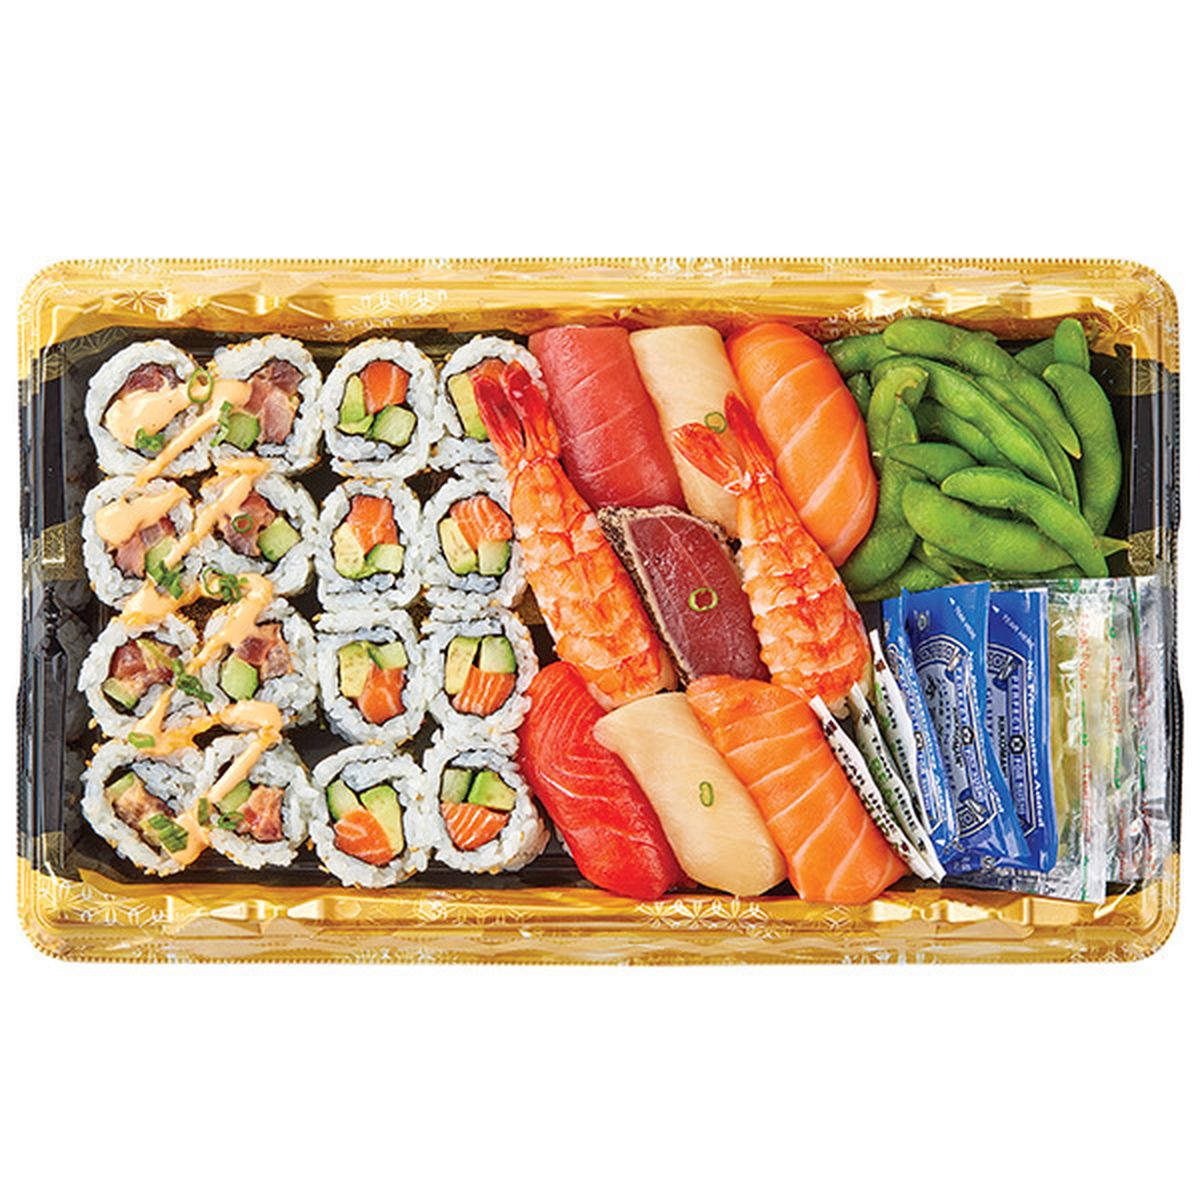 Calories in Wegmans Sushi Lover's Family Pack